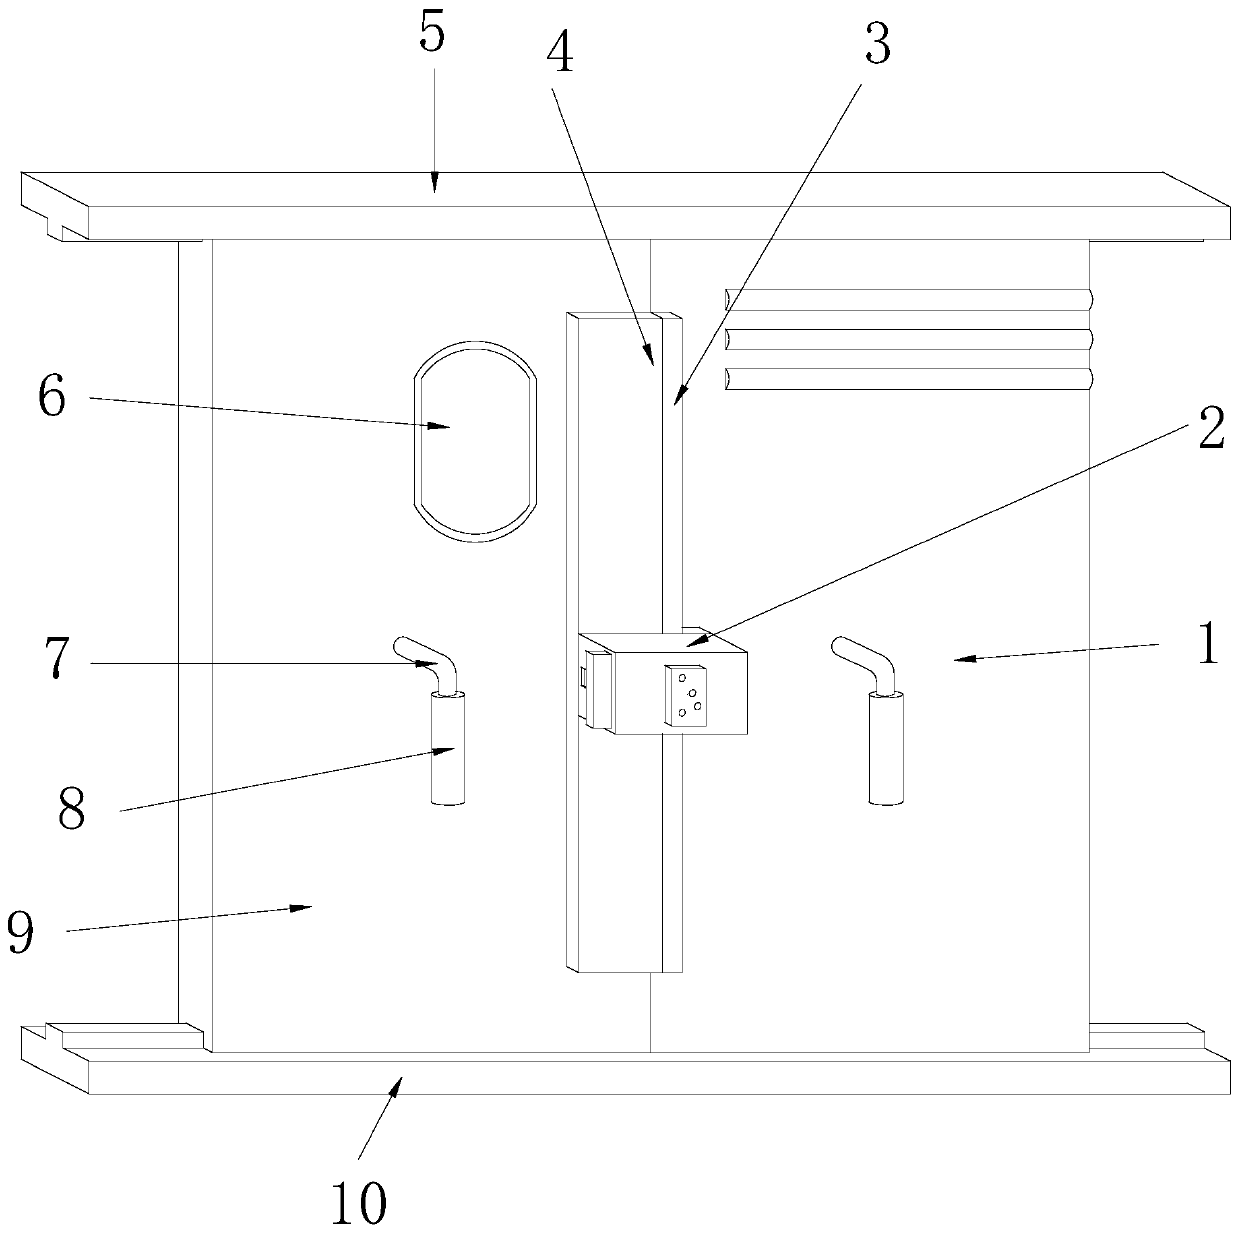 A new type of sealing device for side doors of railway wagons